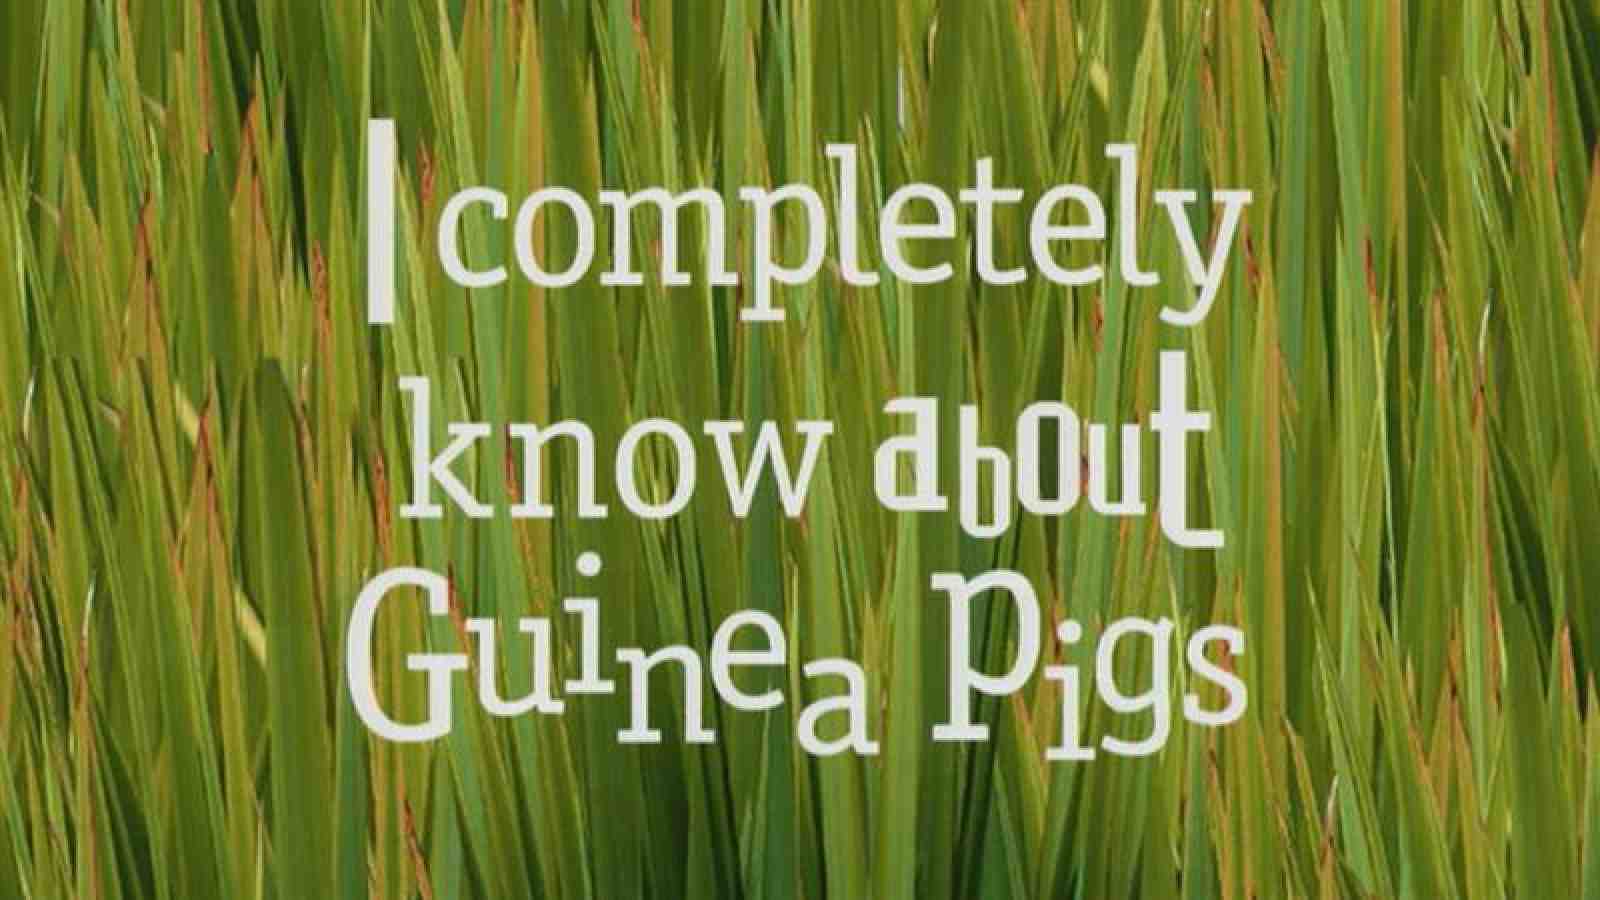 I Know About Guinea Pigs